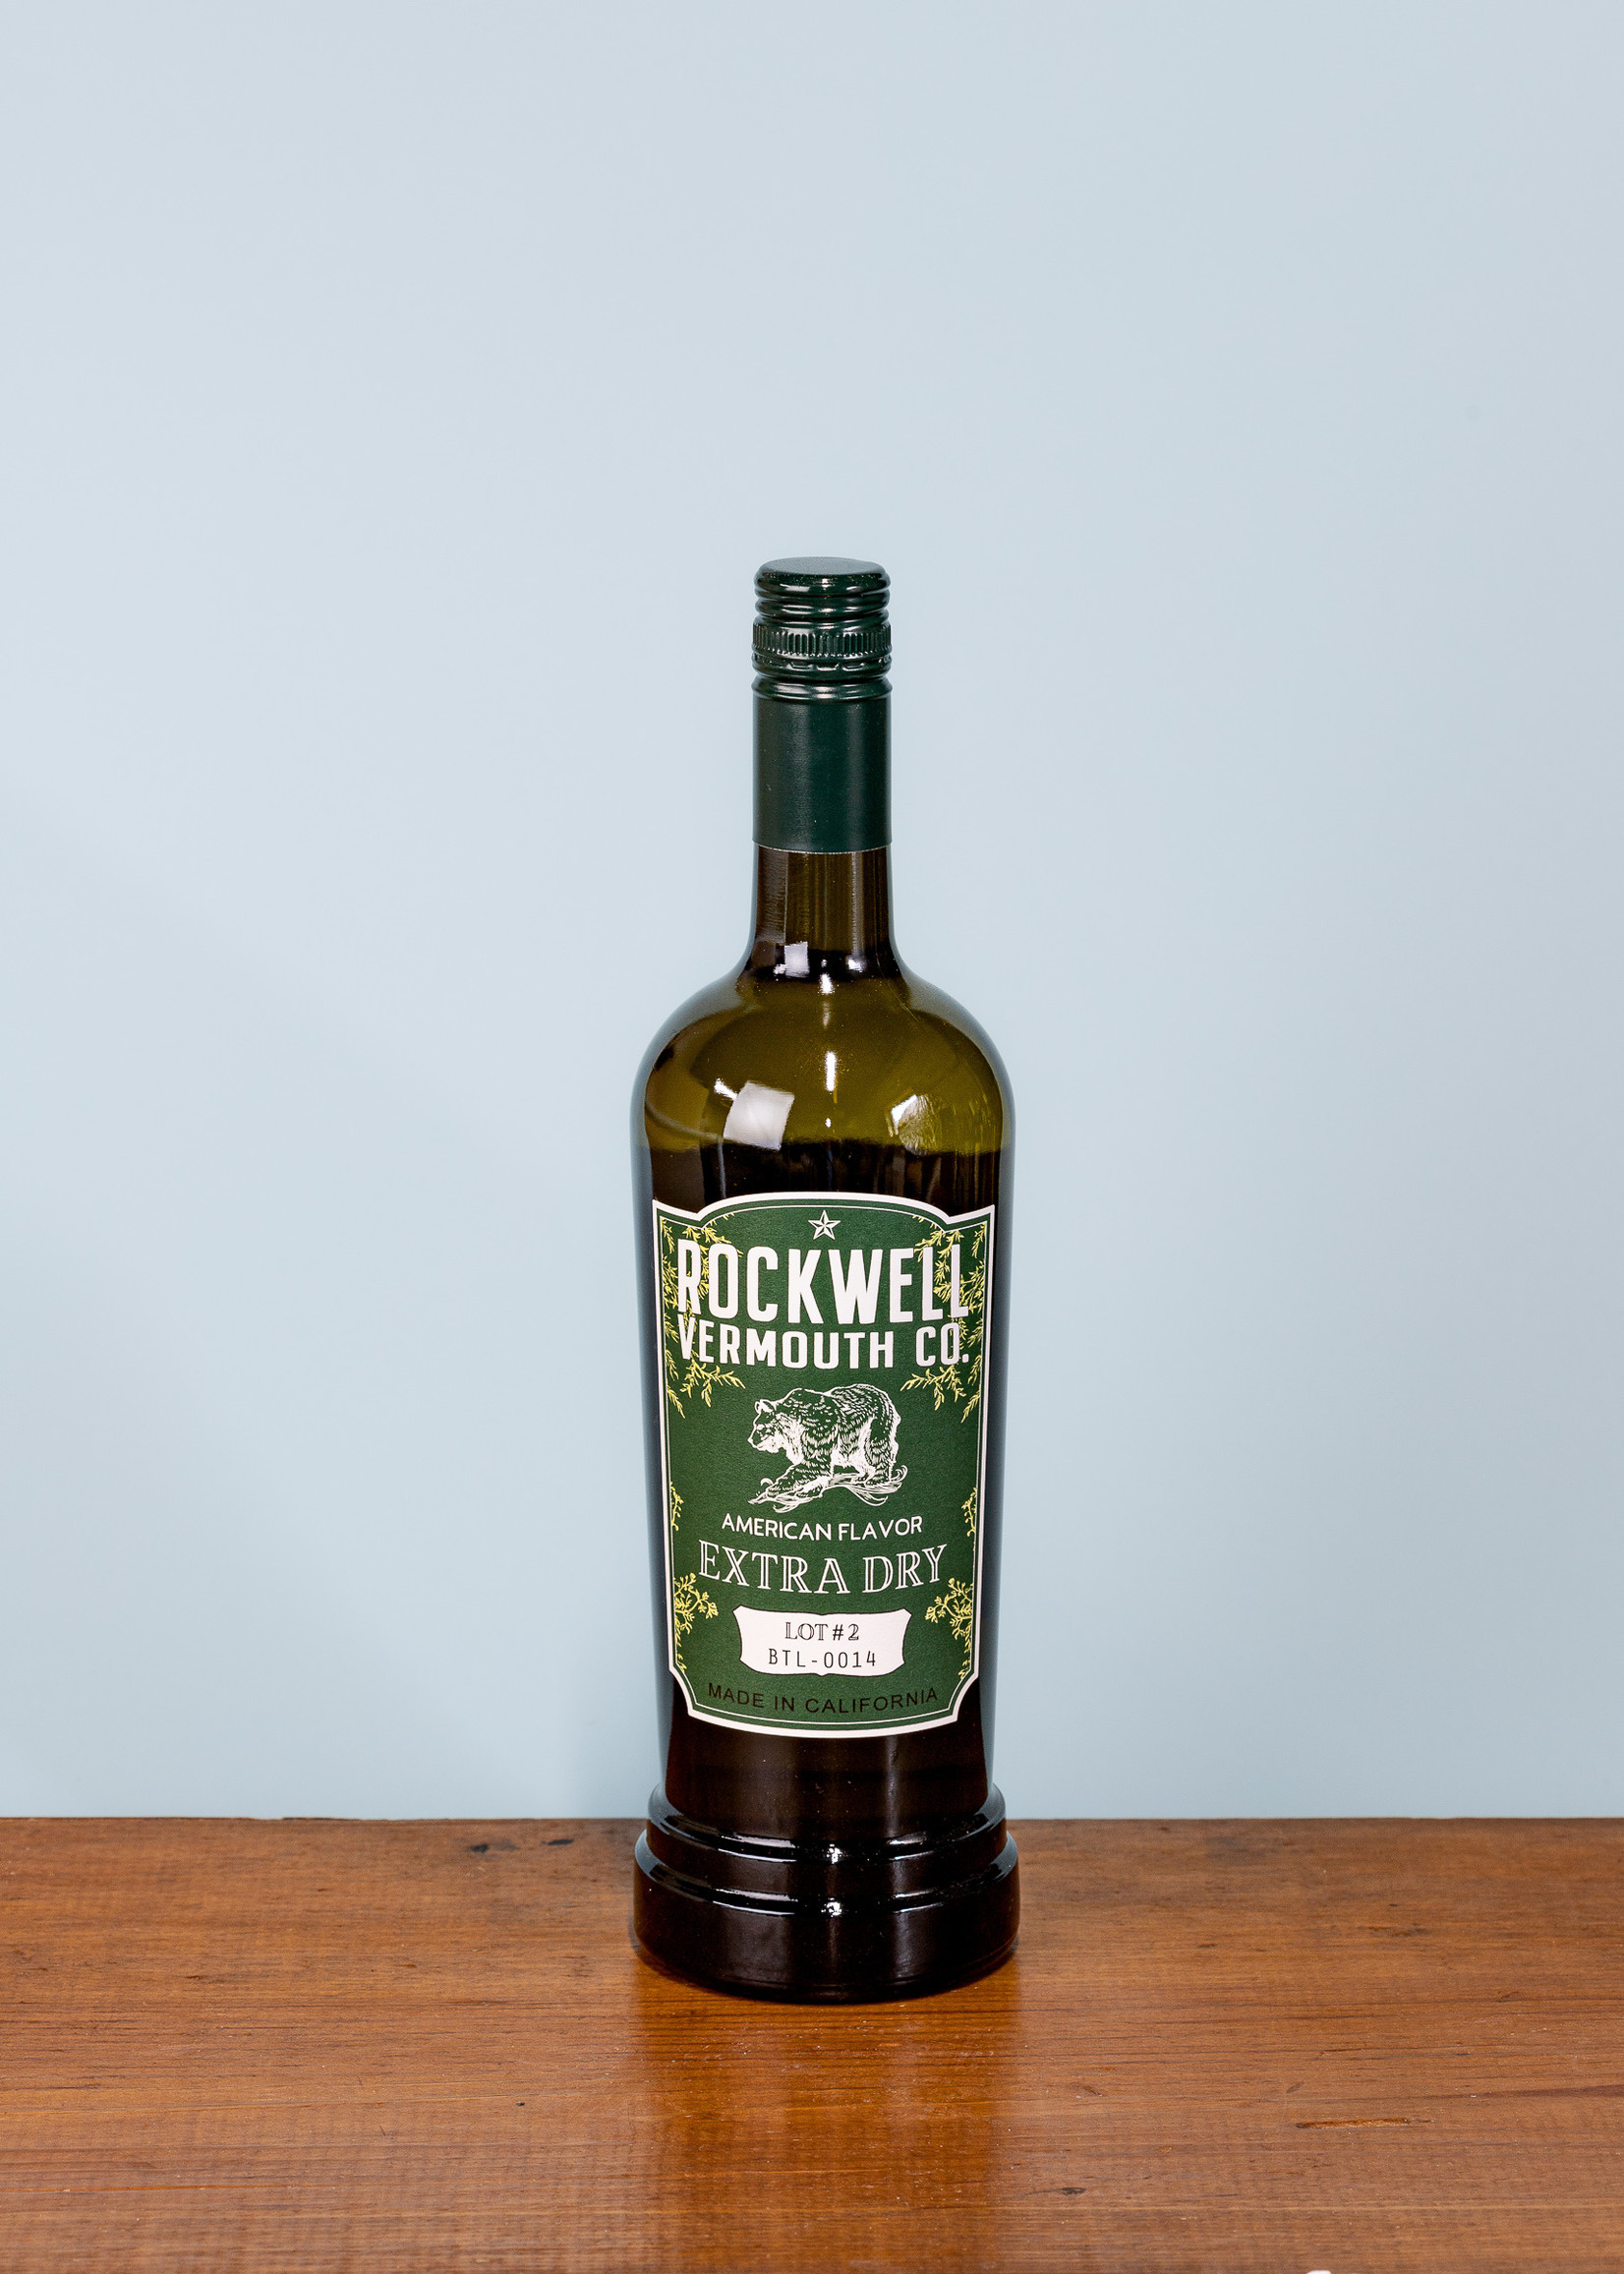 Rockwell Vermouth Extra Dry 750ml